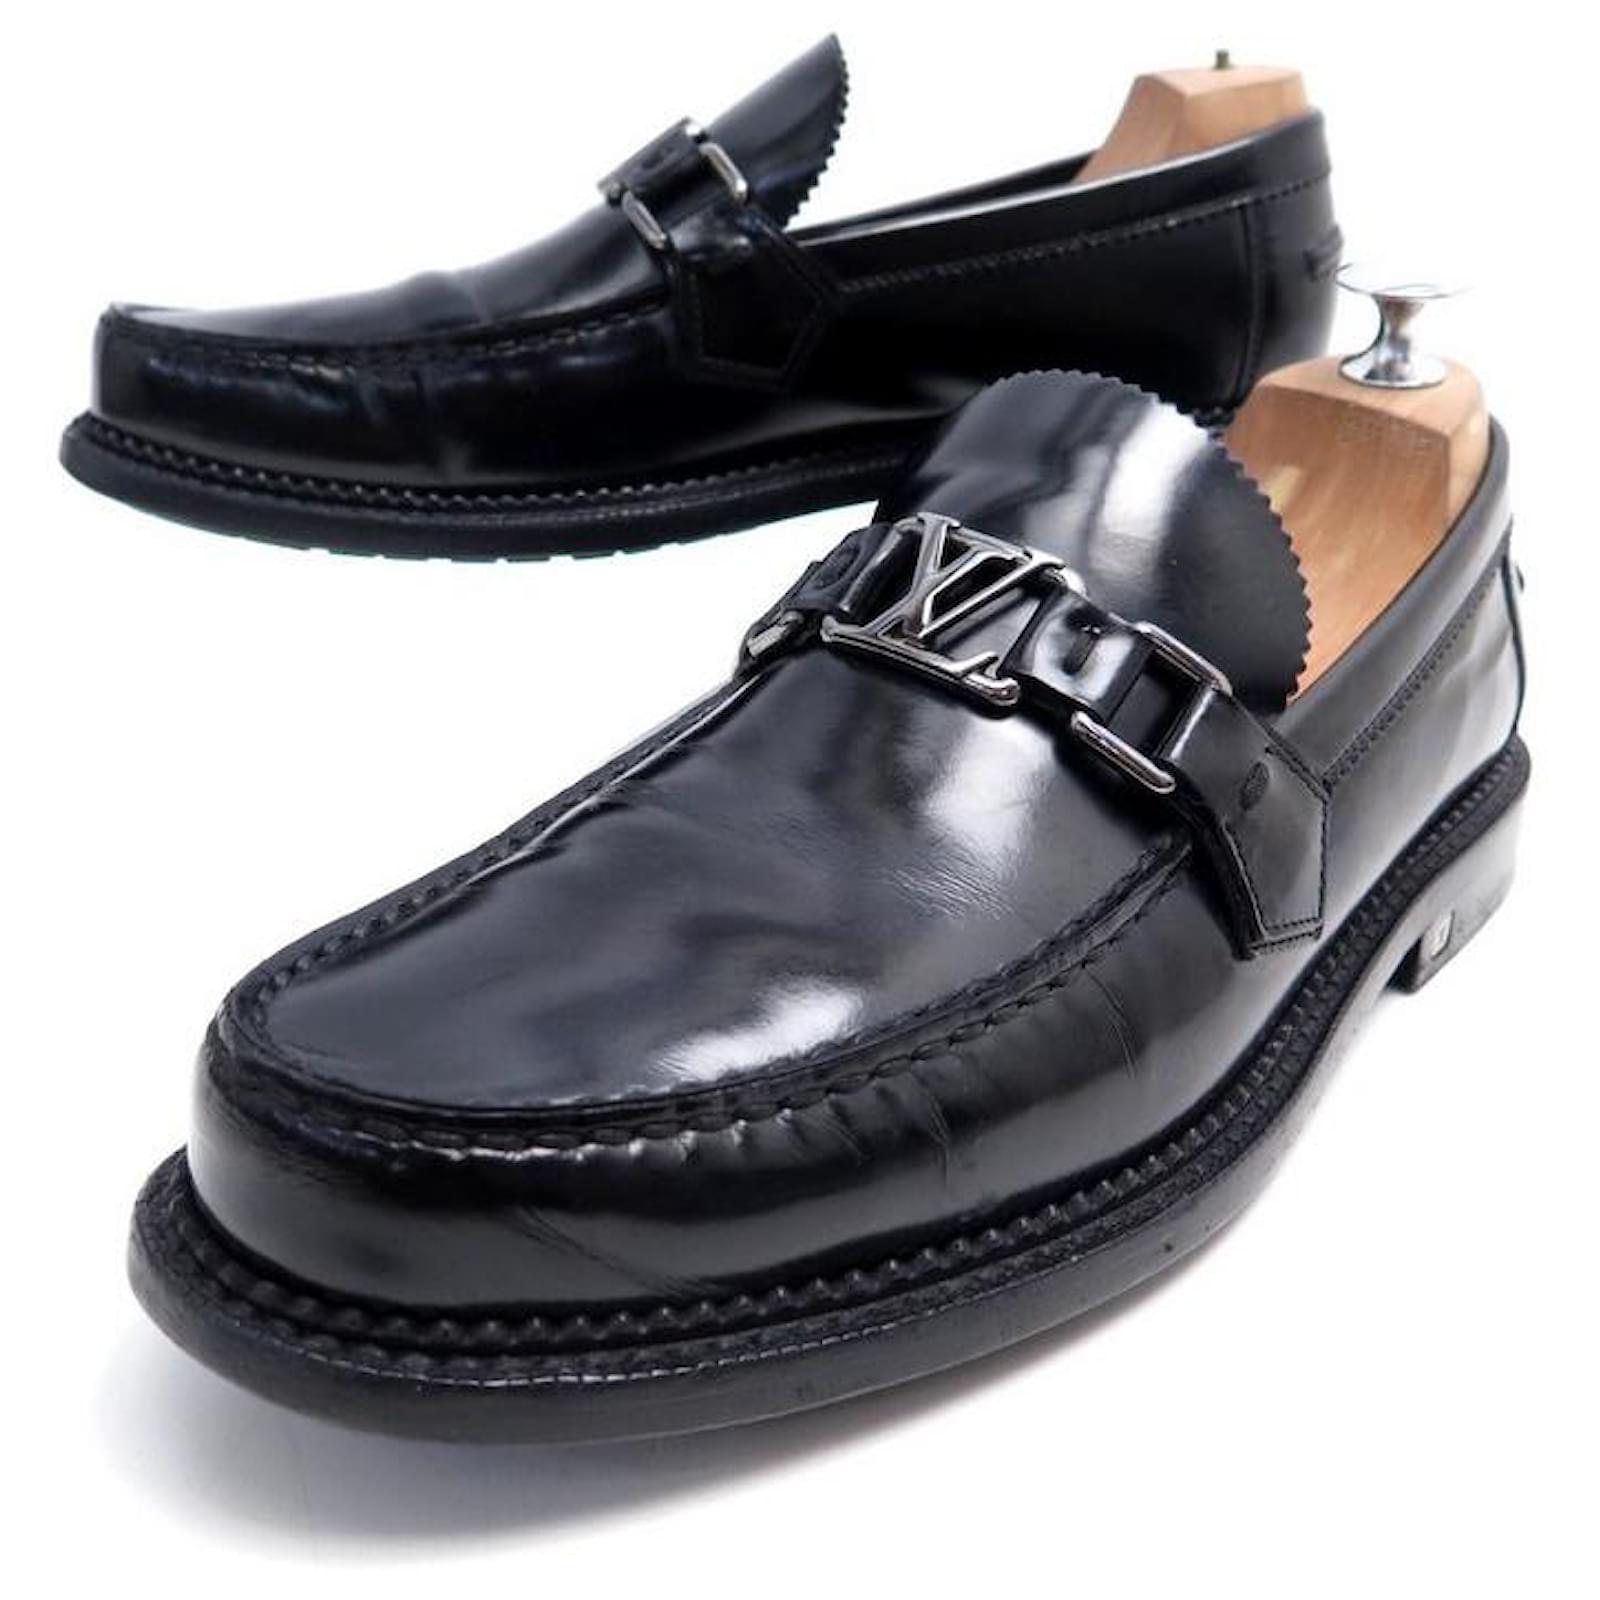 LOUIS VUITTON LOAFERS 6 40 BLACK LEATHER LOAFERS SHOES ref.357817